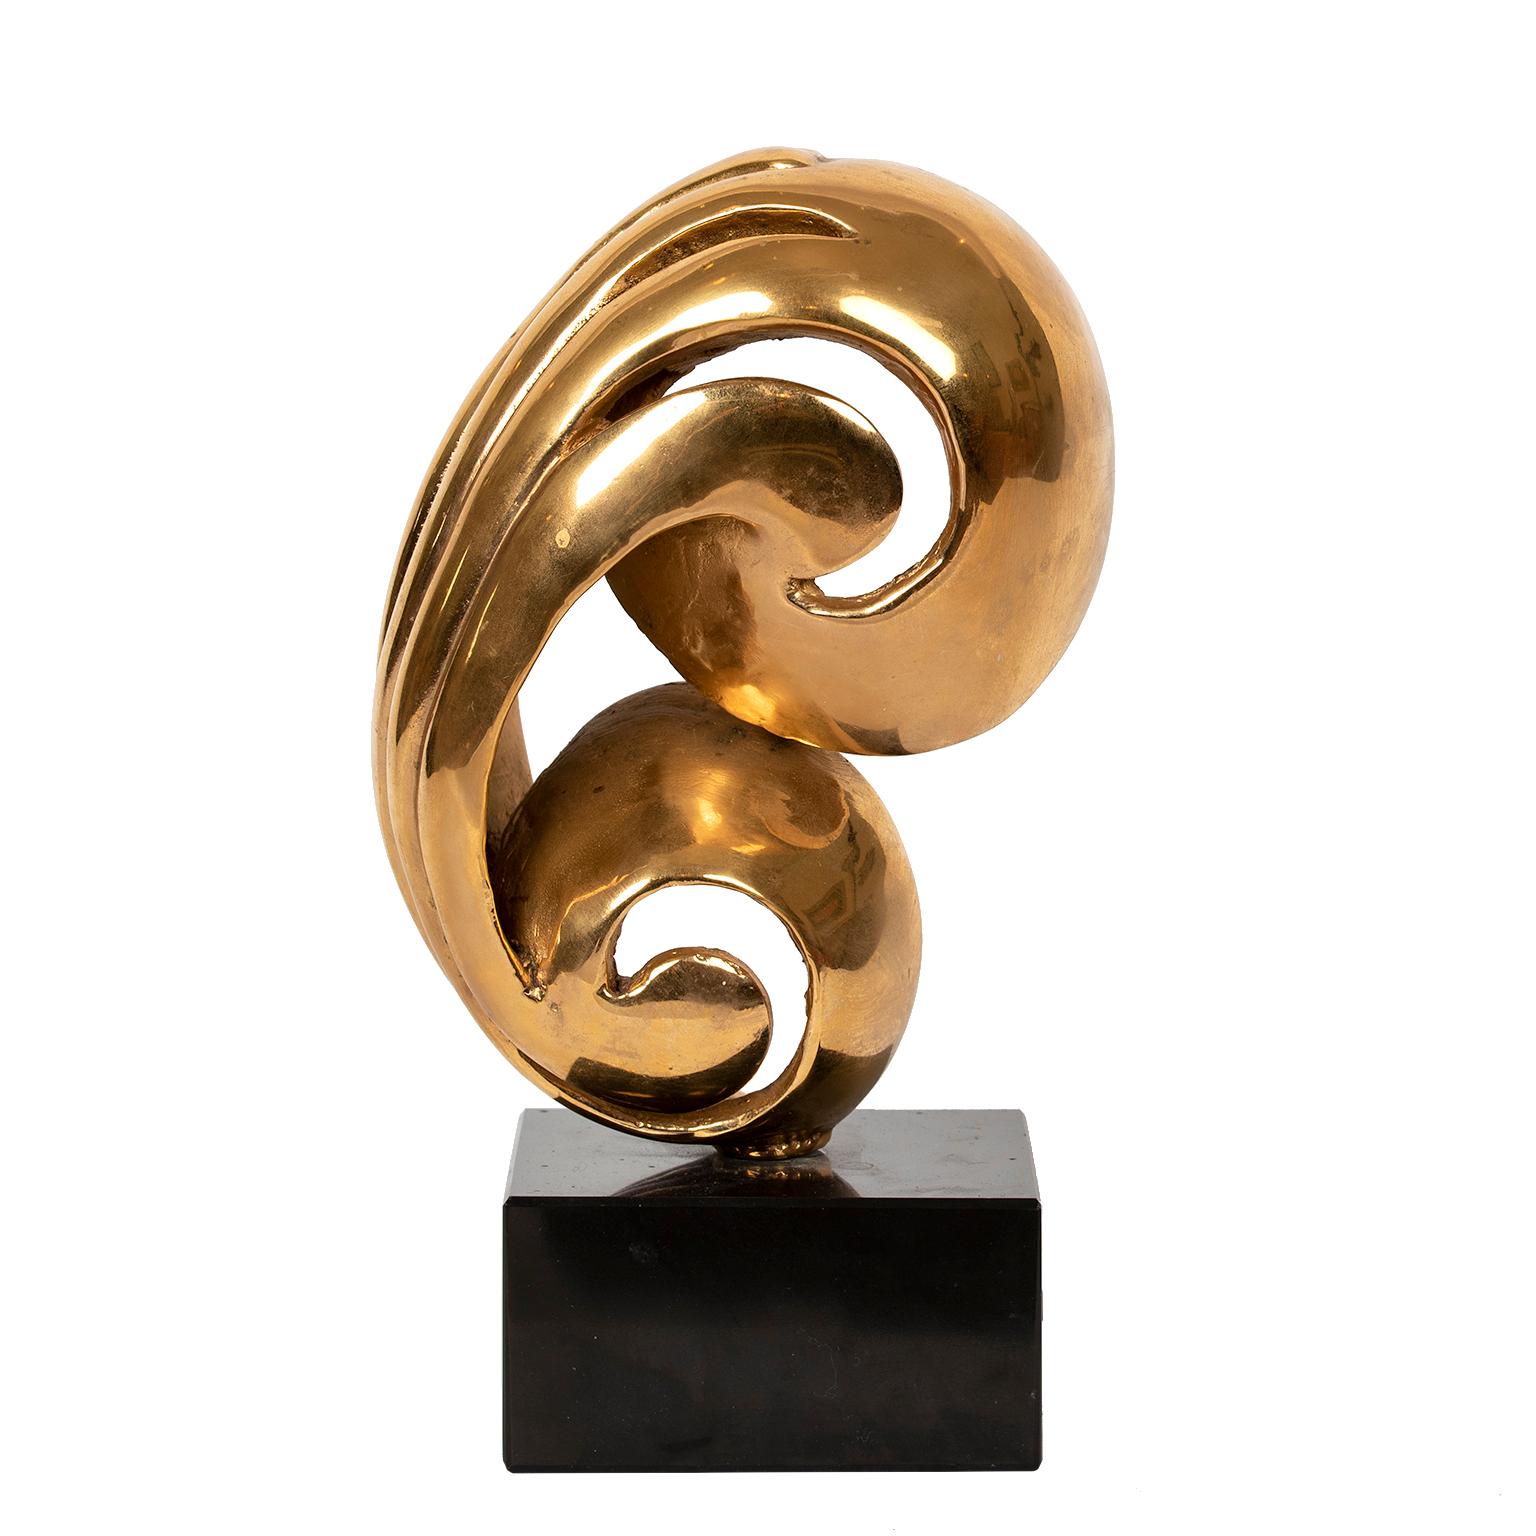 I’m excited to offer this gorgeous bright polished bronze abstract on a marble base that came directly from the home of listed Canadian artist
Jack Culiner.